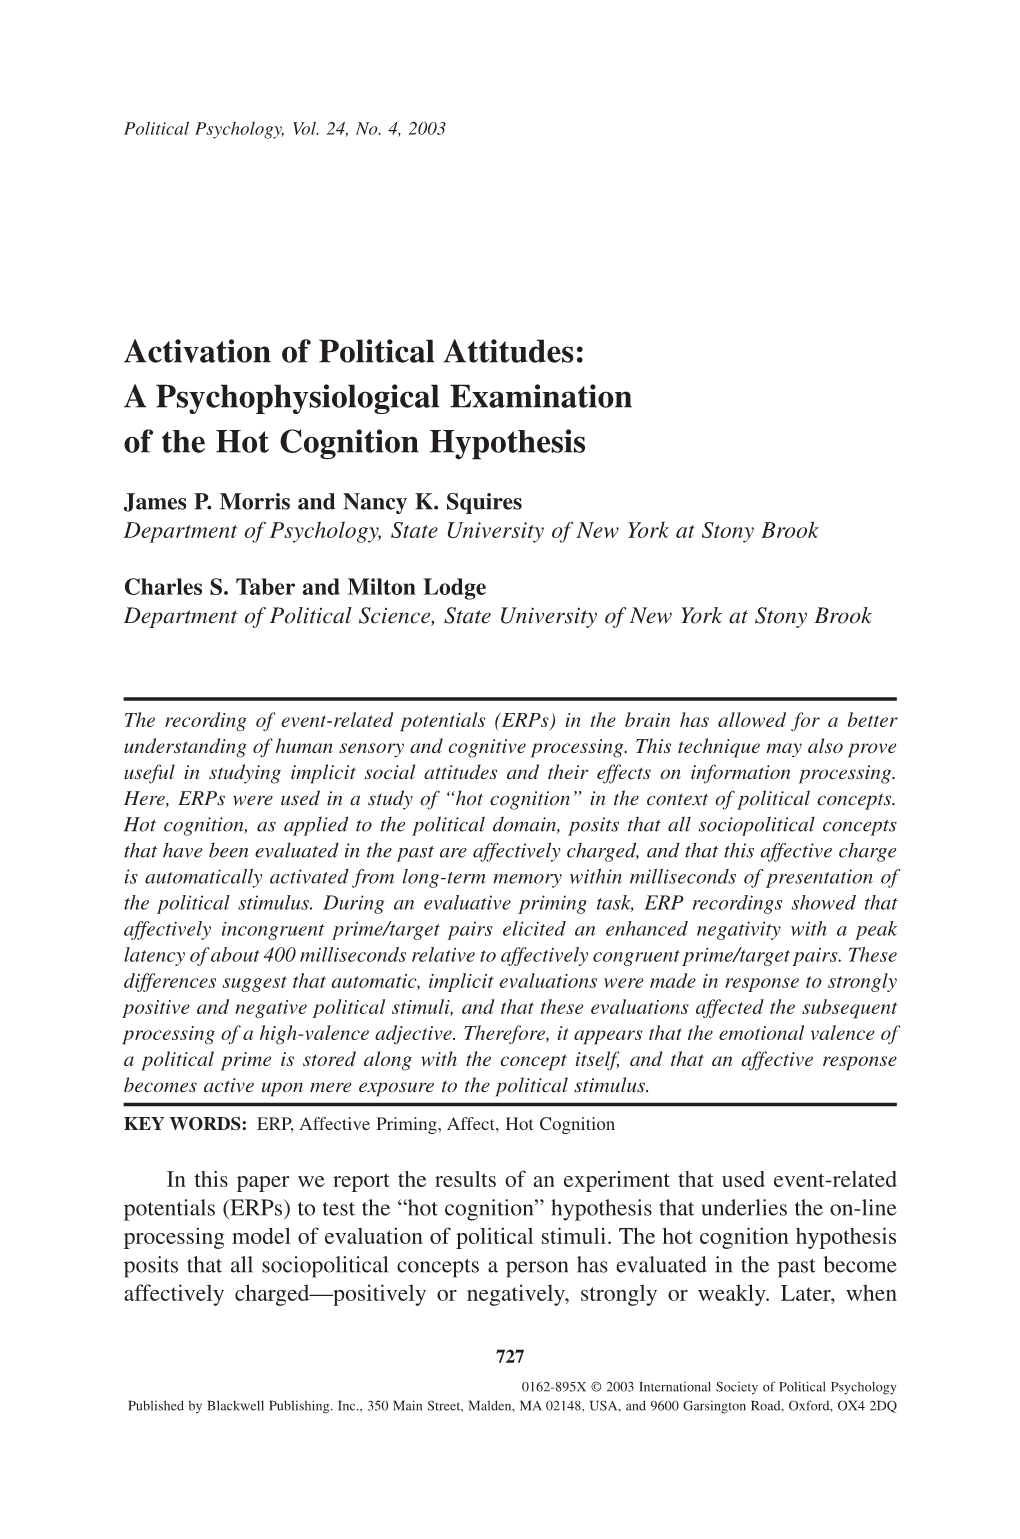 Activation of Political Attitudes: a Psychophysiological Examination of the Hot Cognition Hypothesis